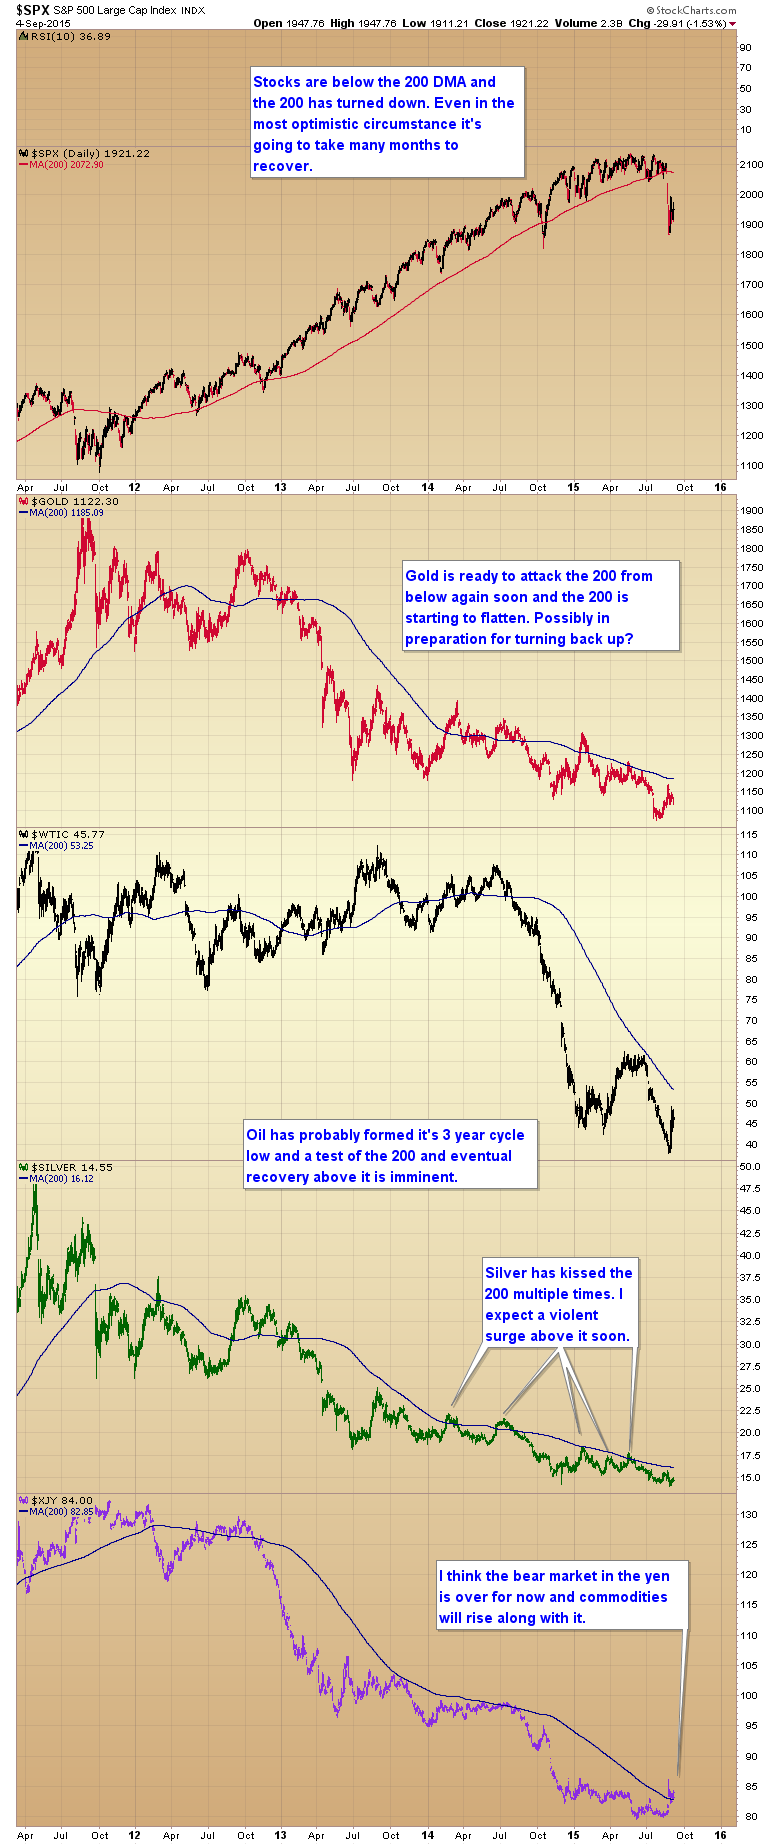 SPX:Gold:Oil:Silver:JPY Daily Charts